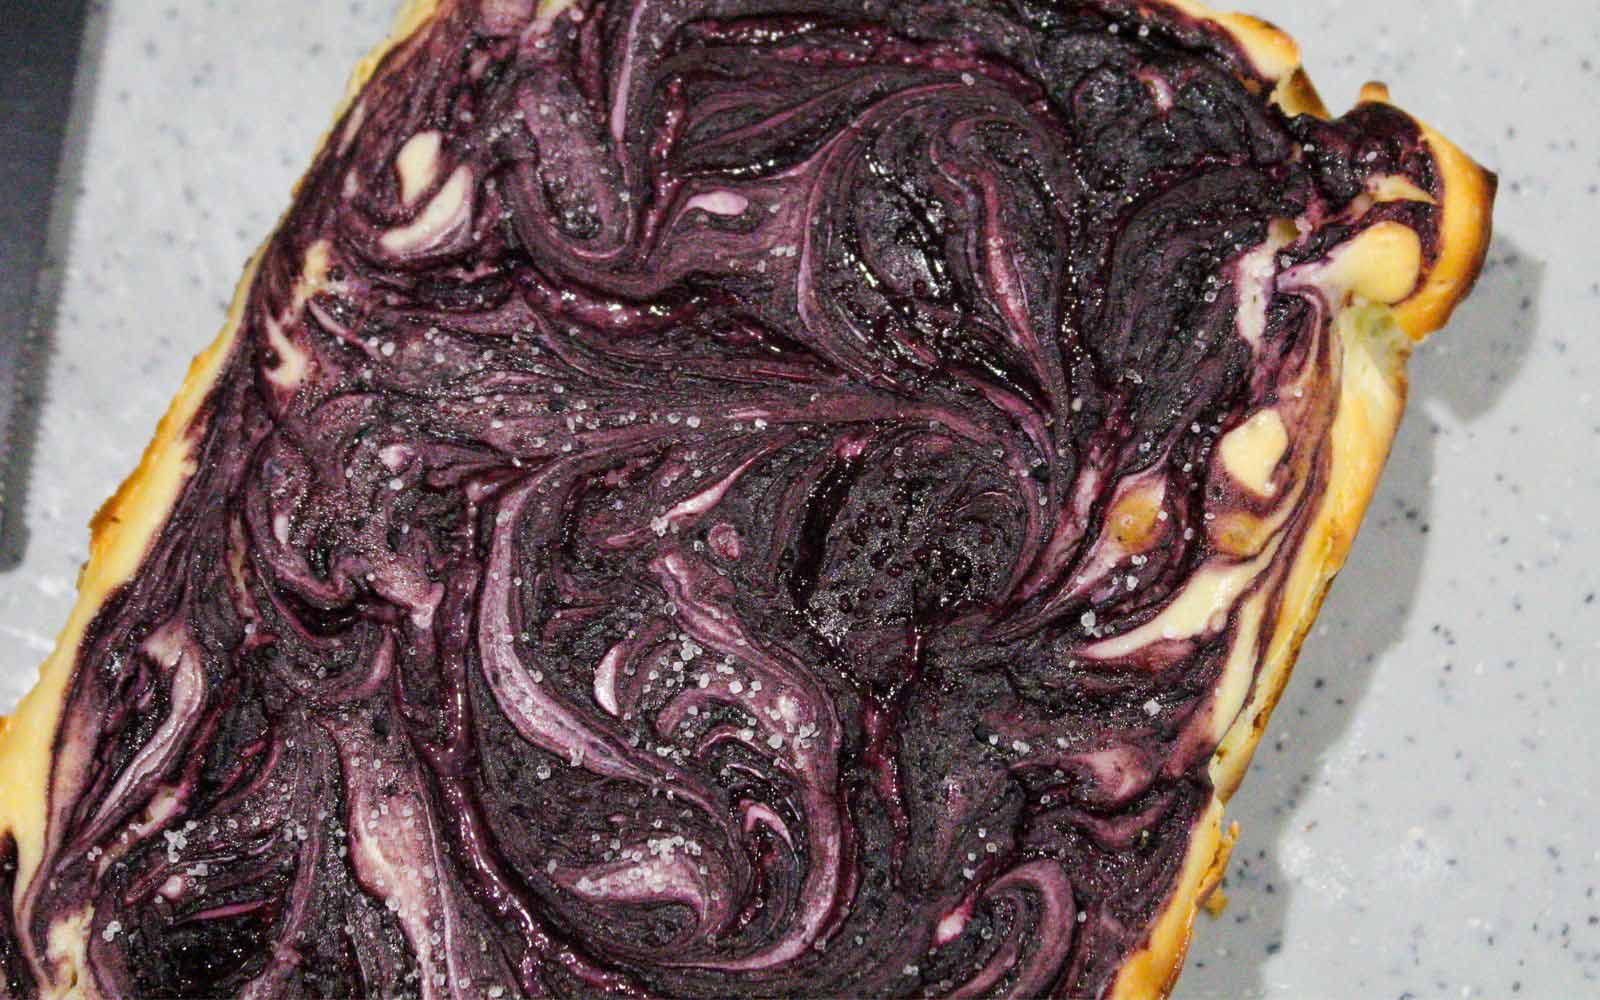 Blueberry Swirl Cheesecake with Vanilla Coconut Flour Crust - Nutracelle